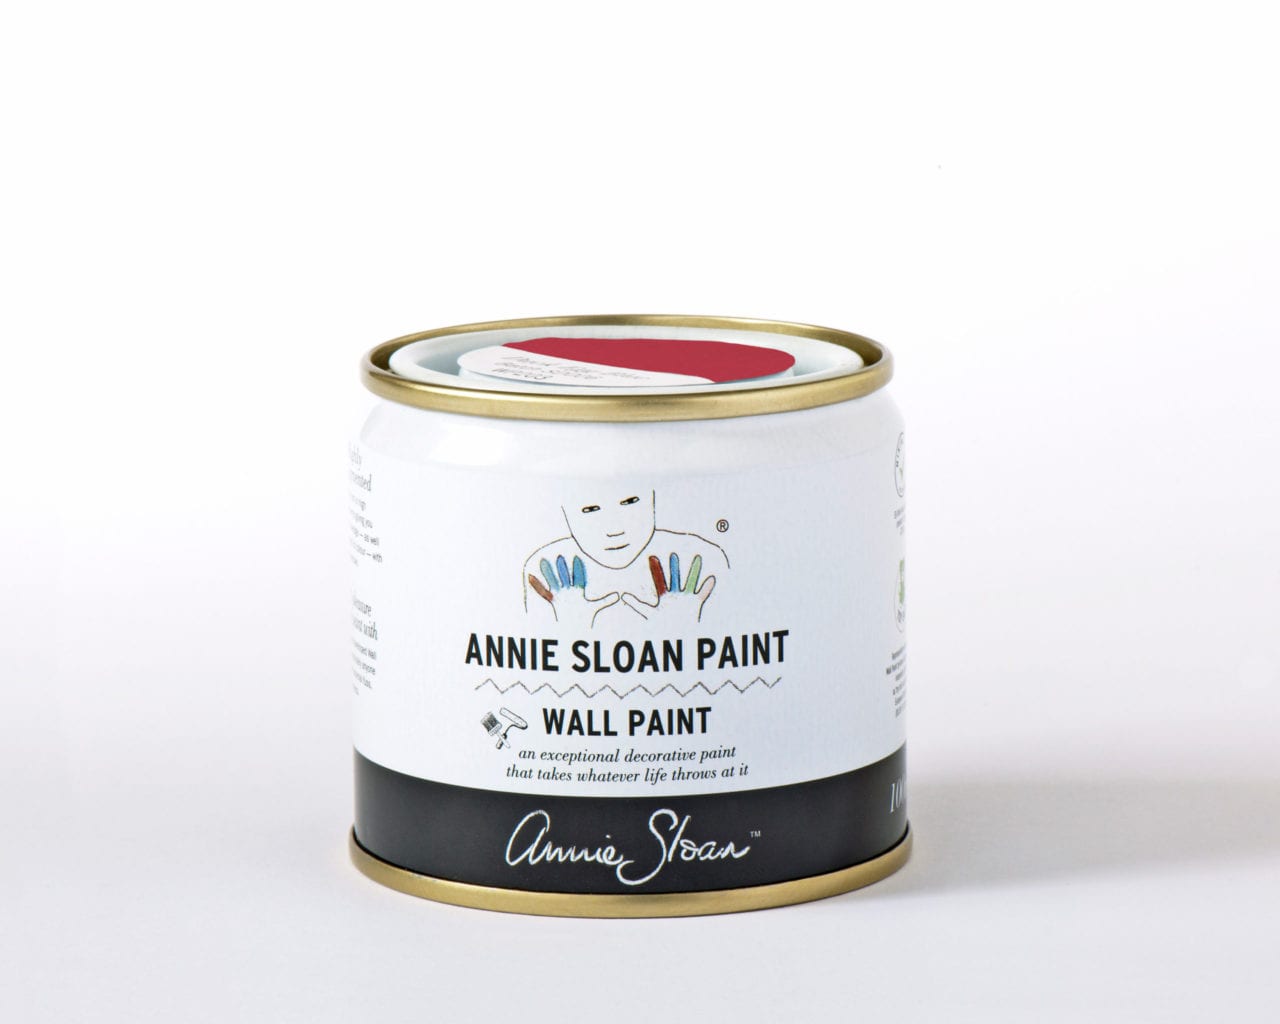 100ml tester tin of Wall Paint by Annie Sloan in Emperor's Silk, a bright, pure red